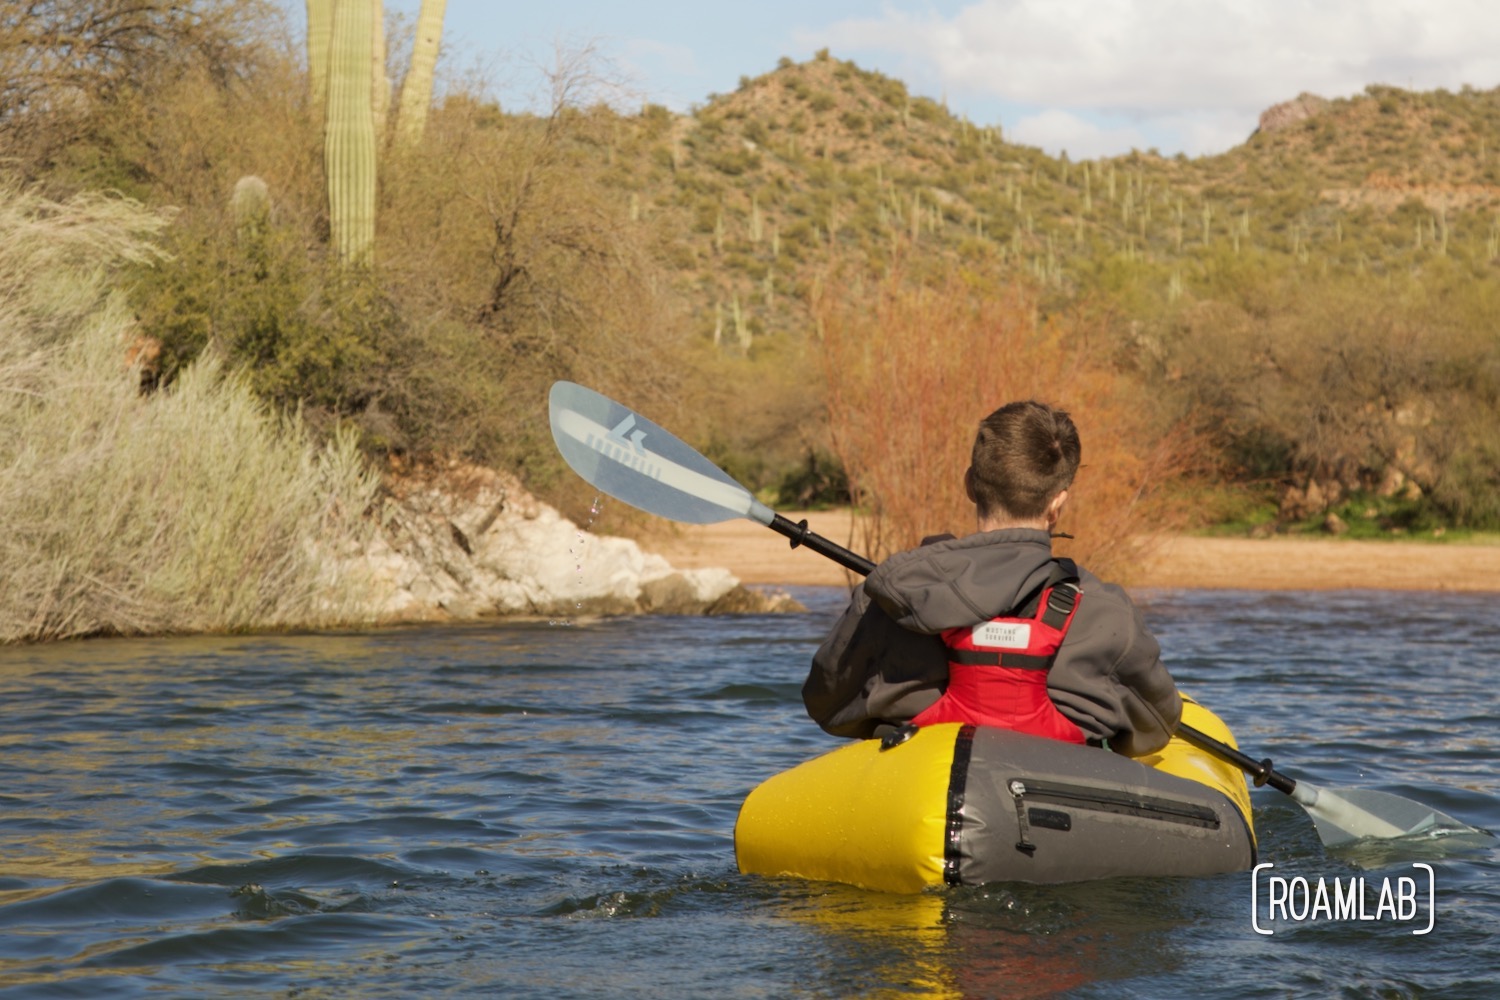 Man in a yellow raft paddling on a lake with desert brush and saguaro cactus in the background.